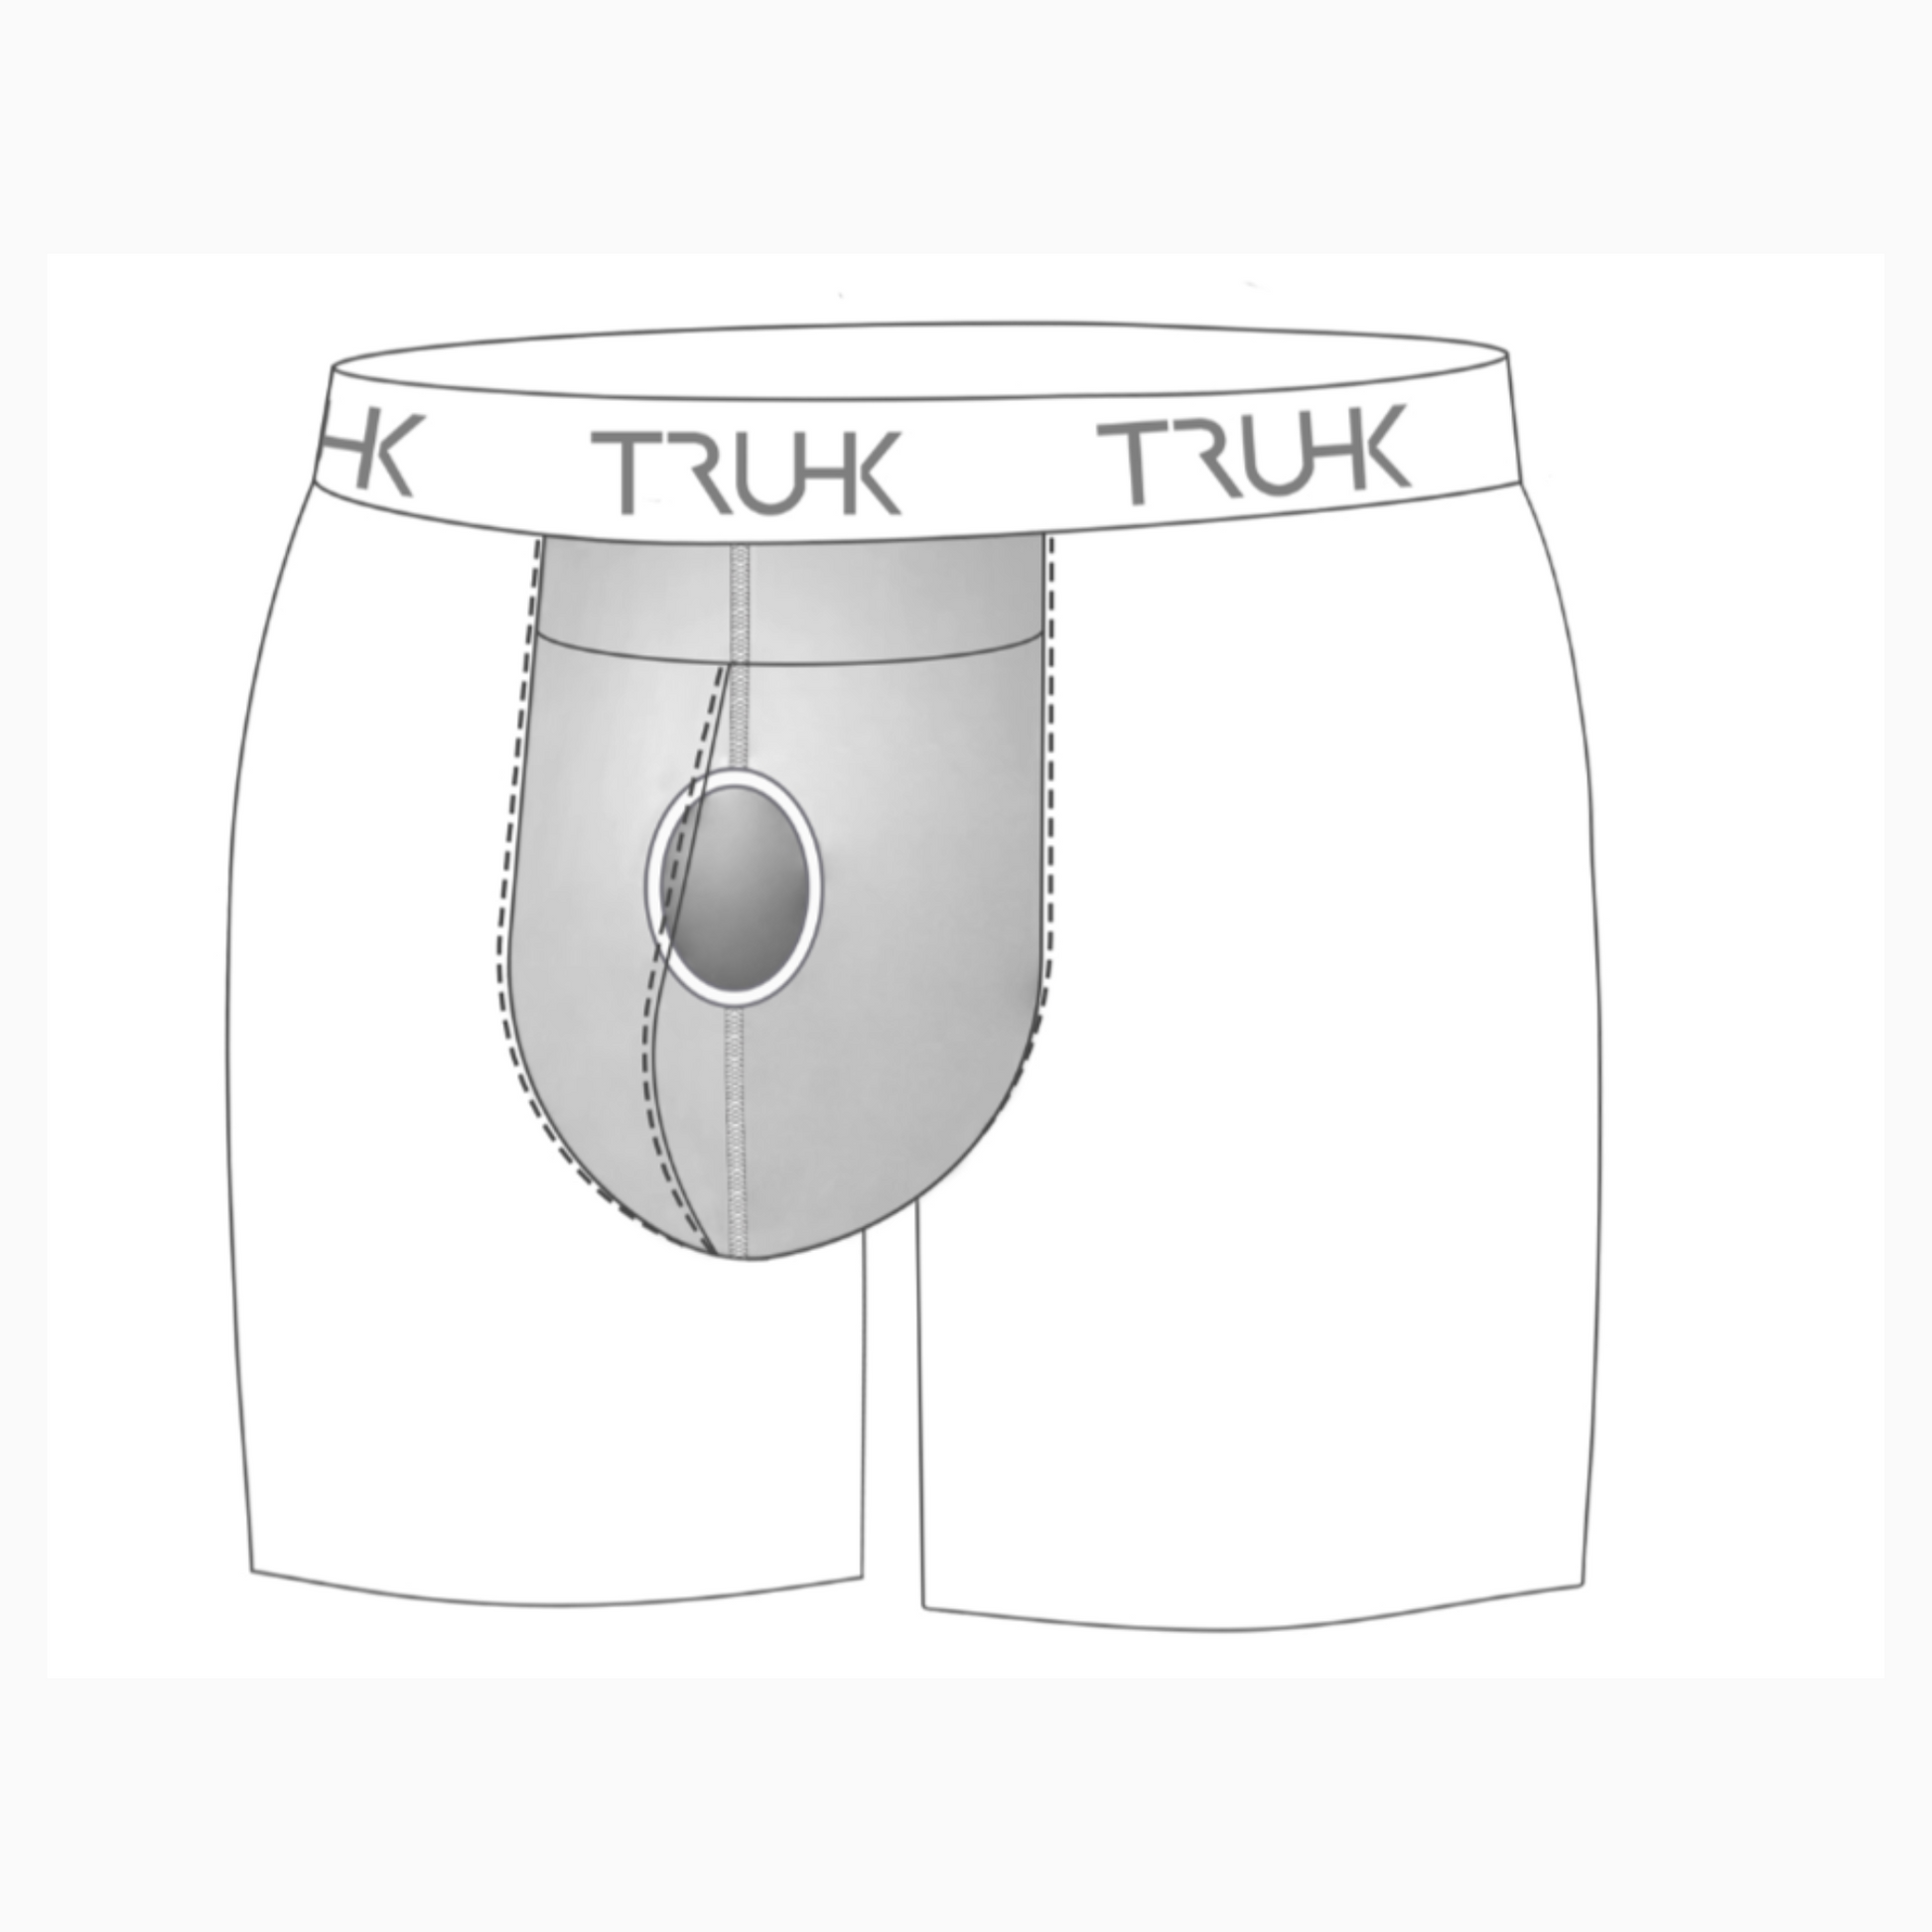 Rodeoh StP Packing Brief Brief STP/Packing TRUHK Underwear ﻿have a